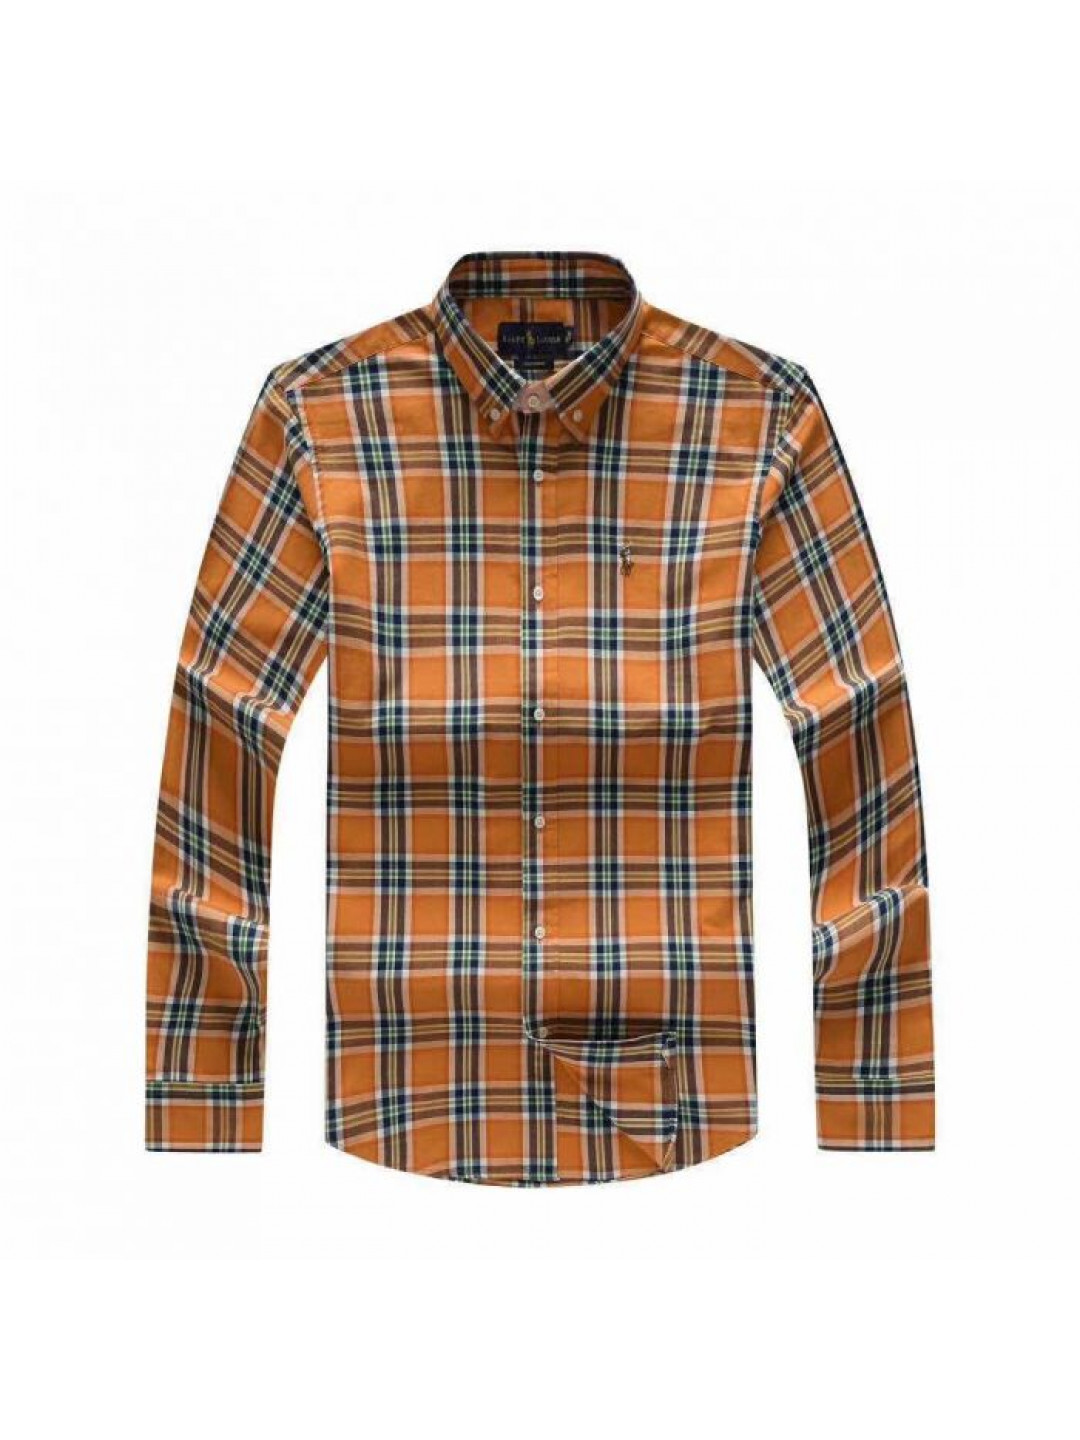 Shop Online for our latest Polo Ralph Lauren Men's Checkered Long Sleeve  Shirt in Lagos, Nigeria | Orange Blue Green